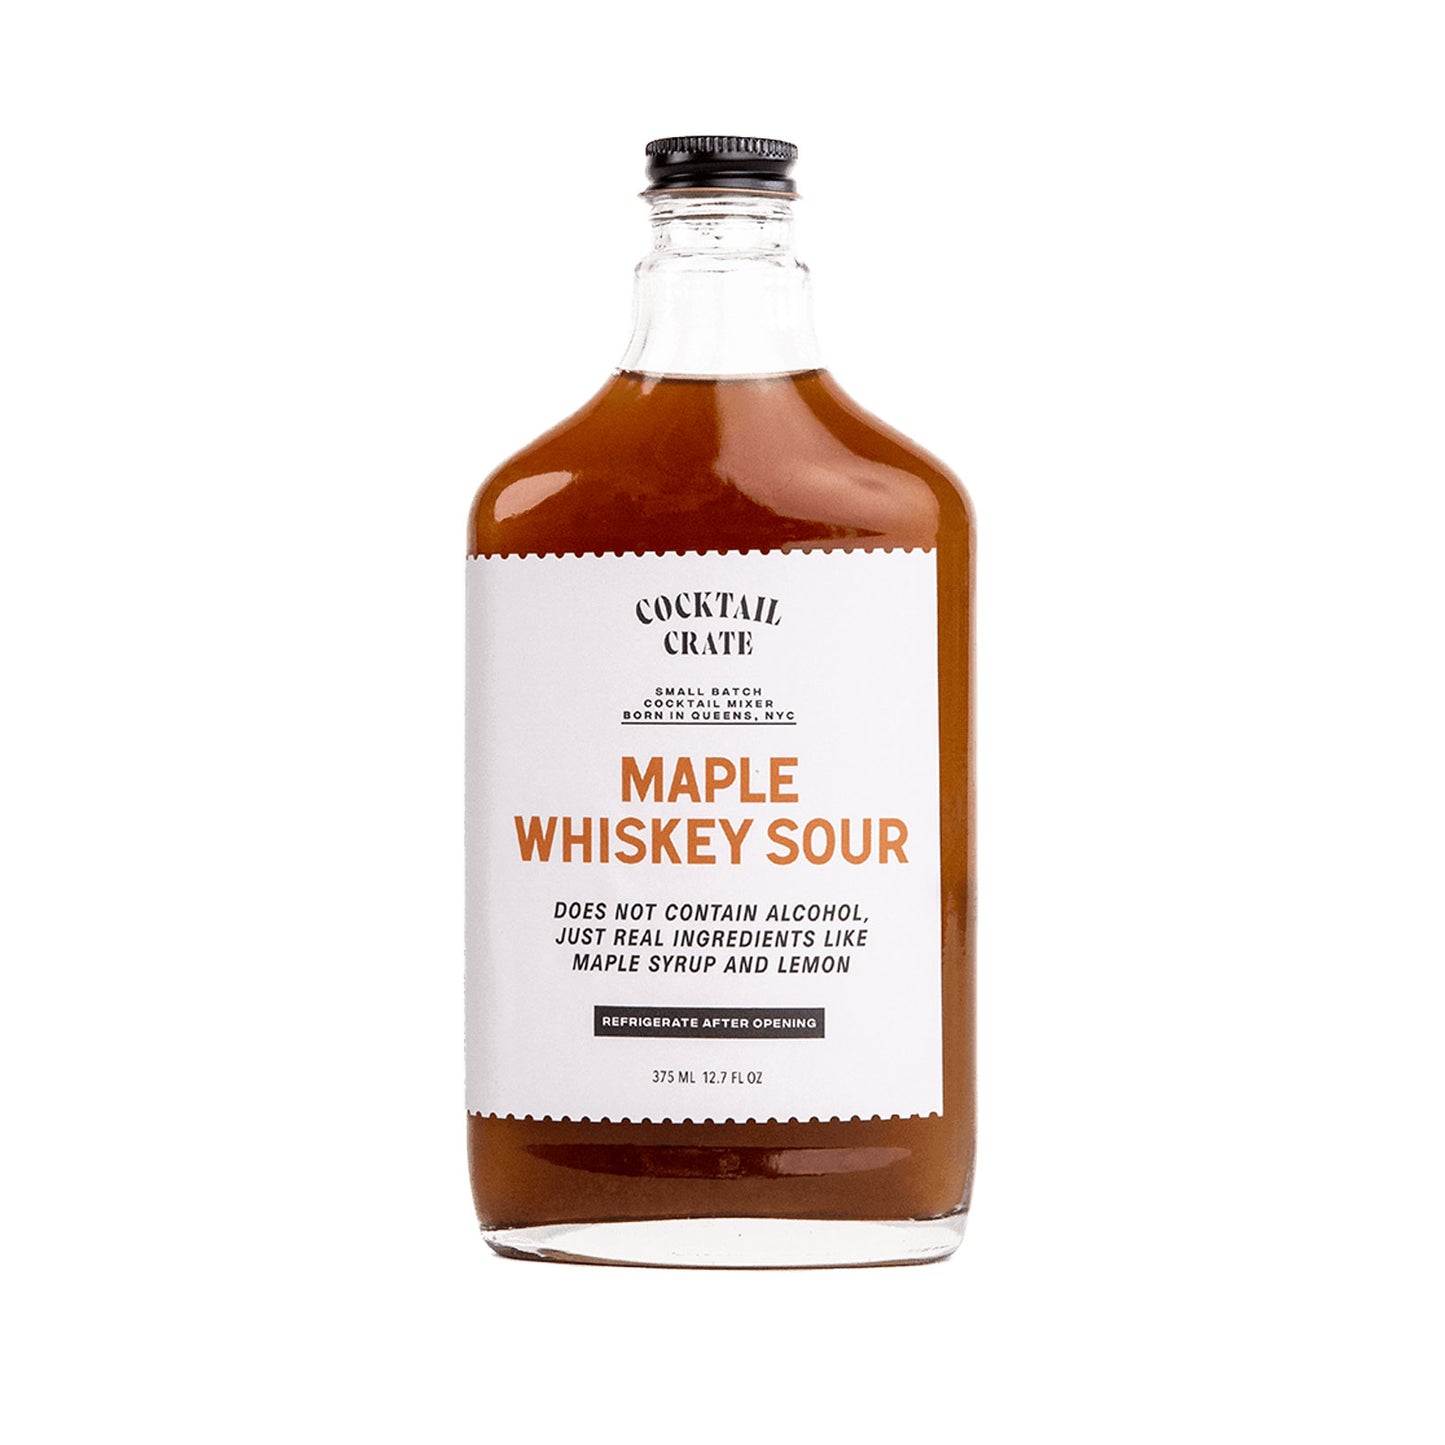 Cocktail Crate Maple Whiskey Sour